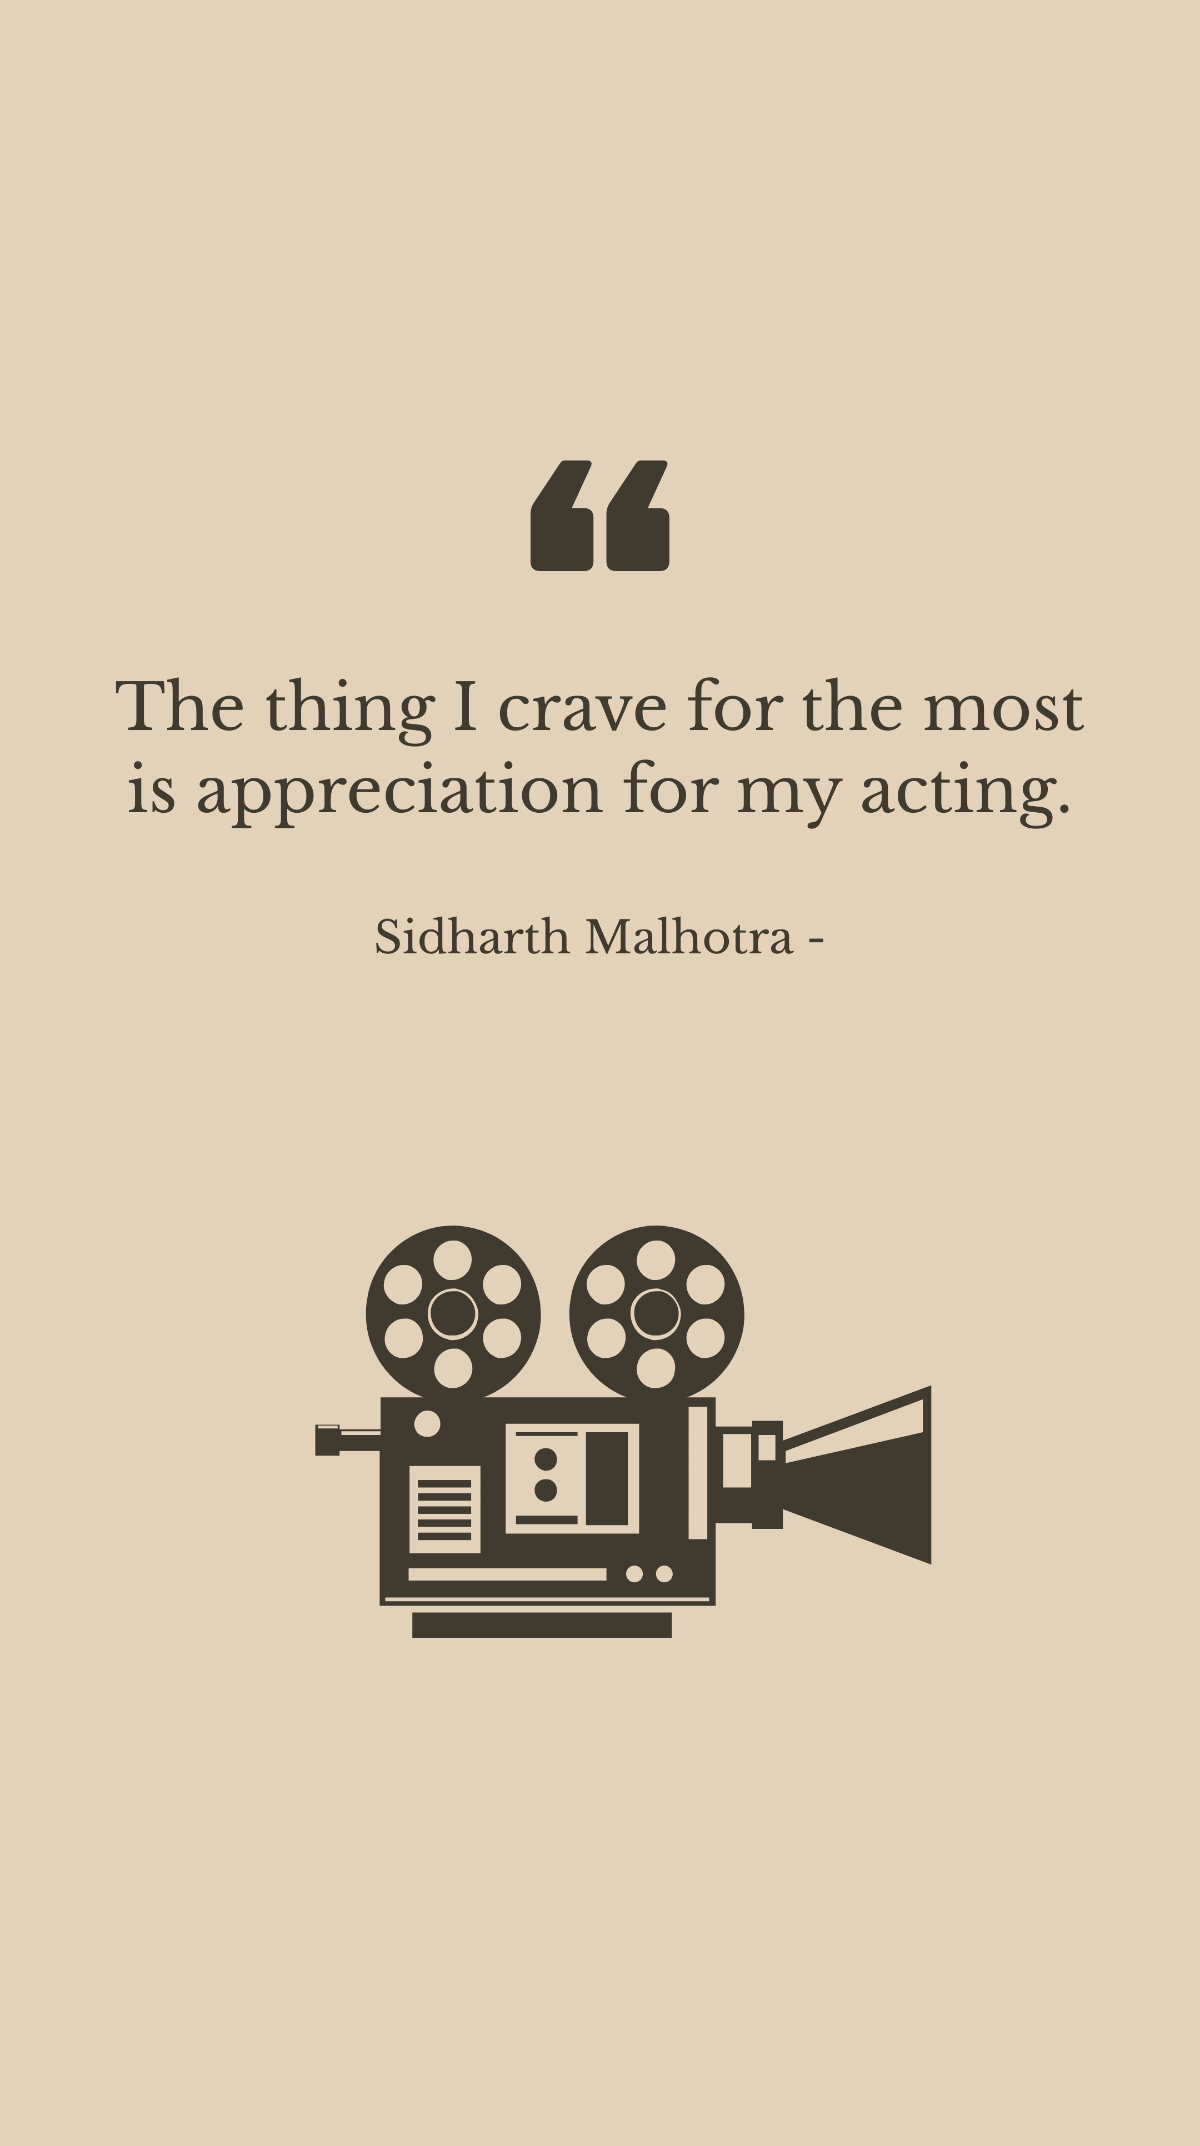 Sidharth Malhotra - The thing I crave for the most is appreciation for my acting. Template